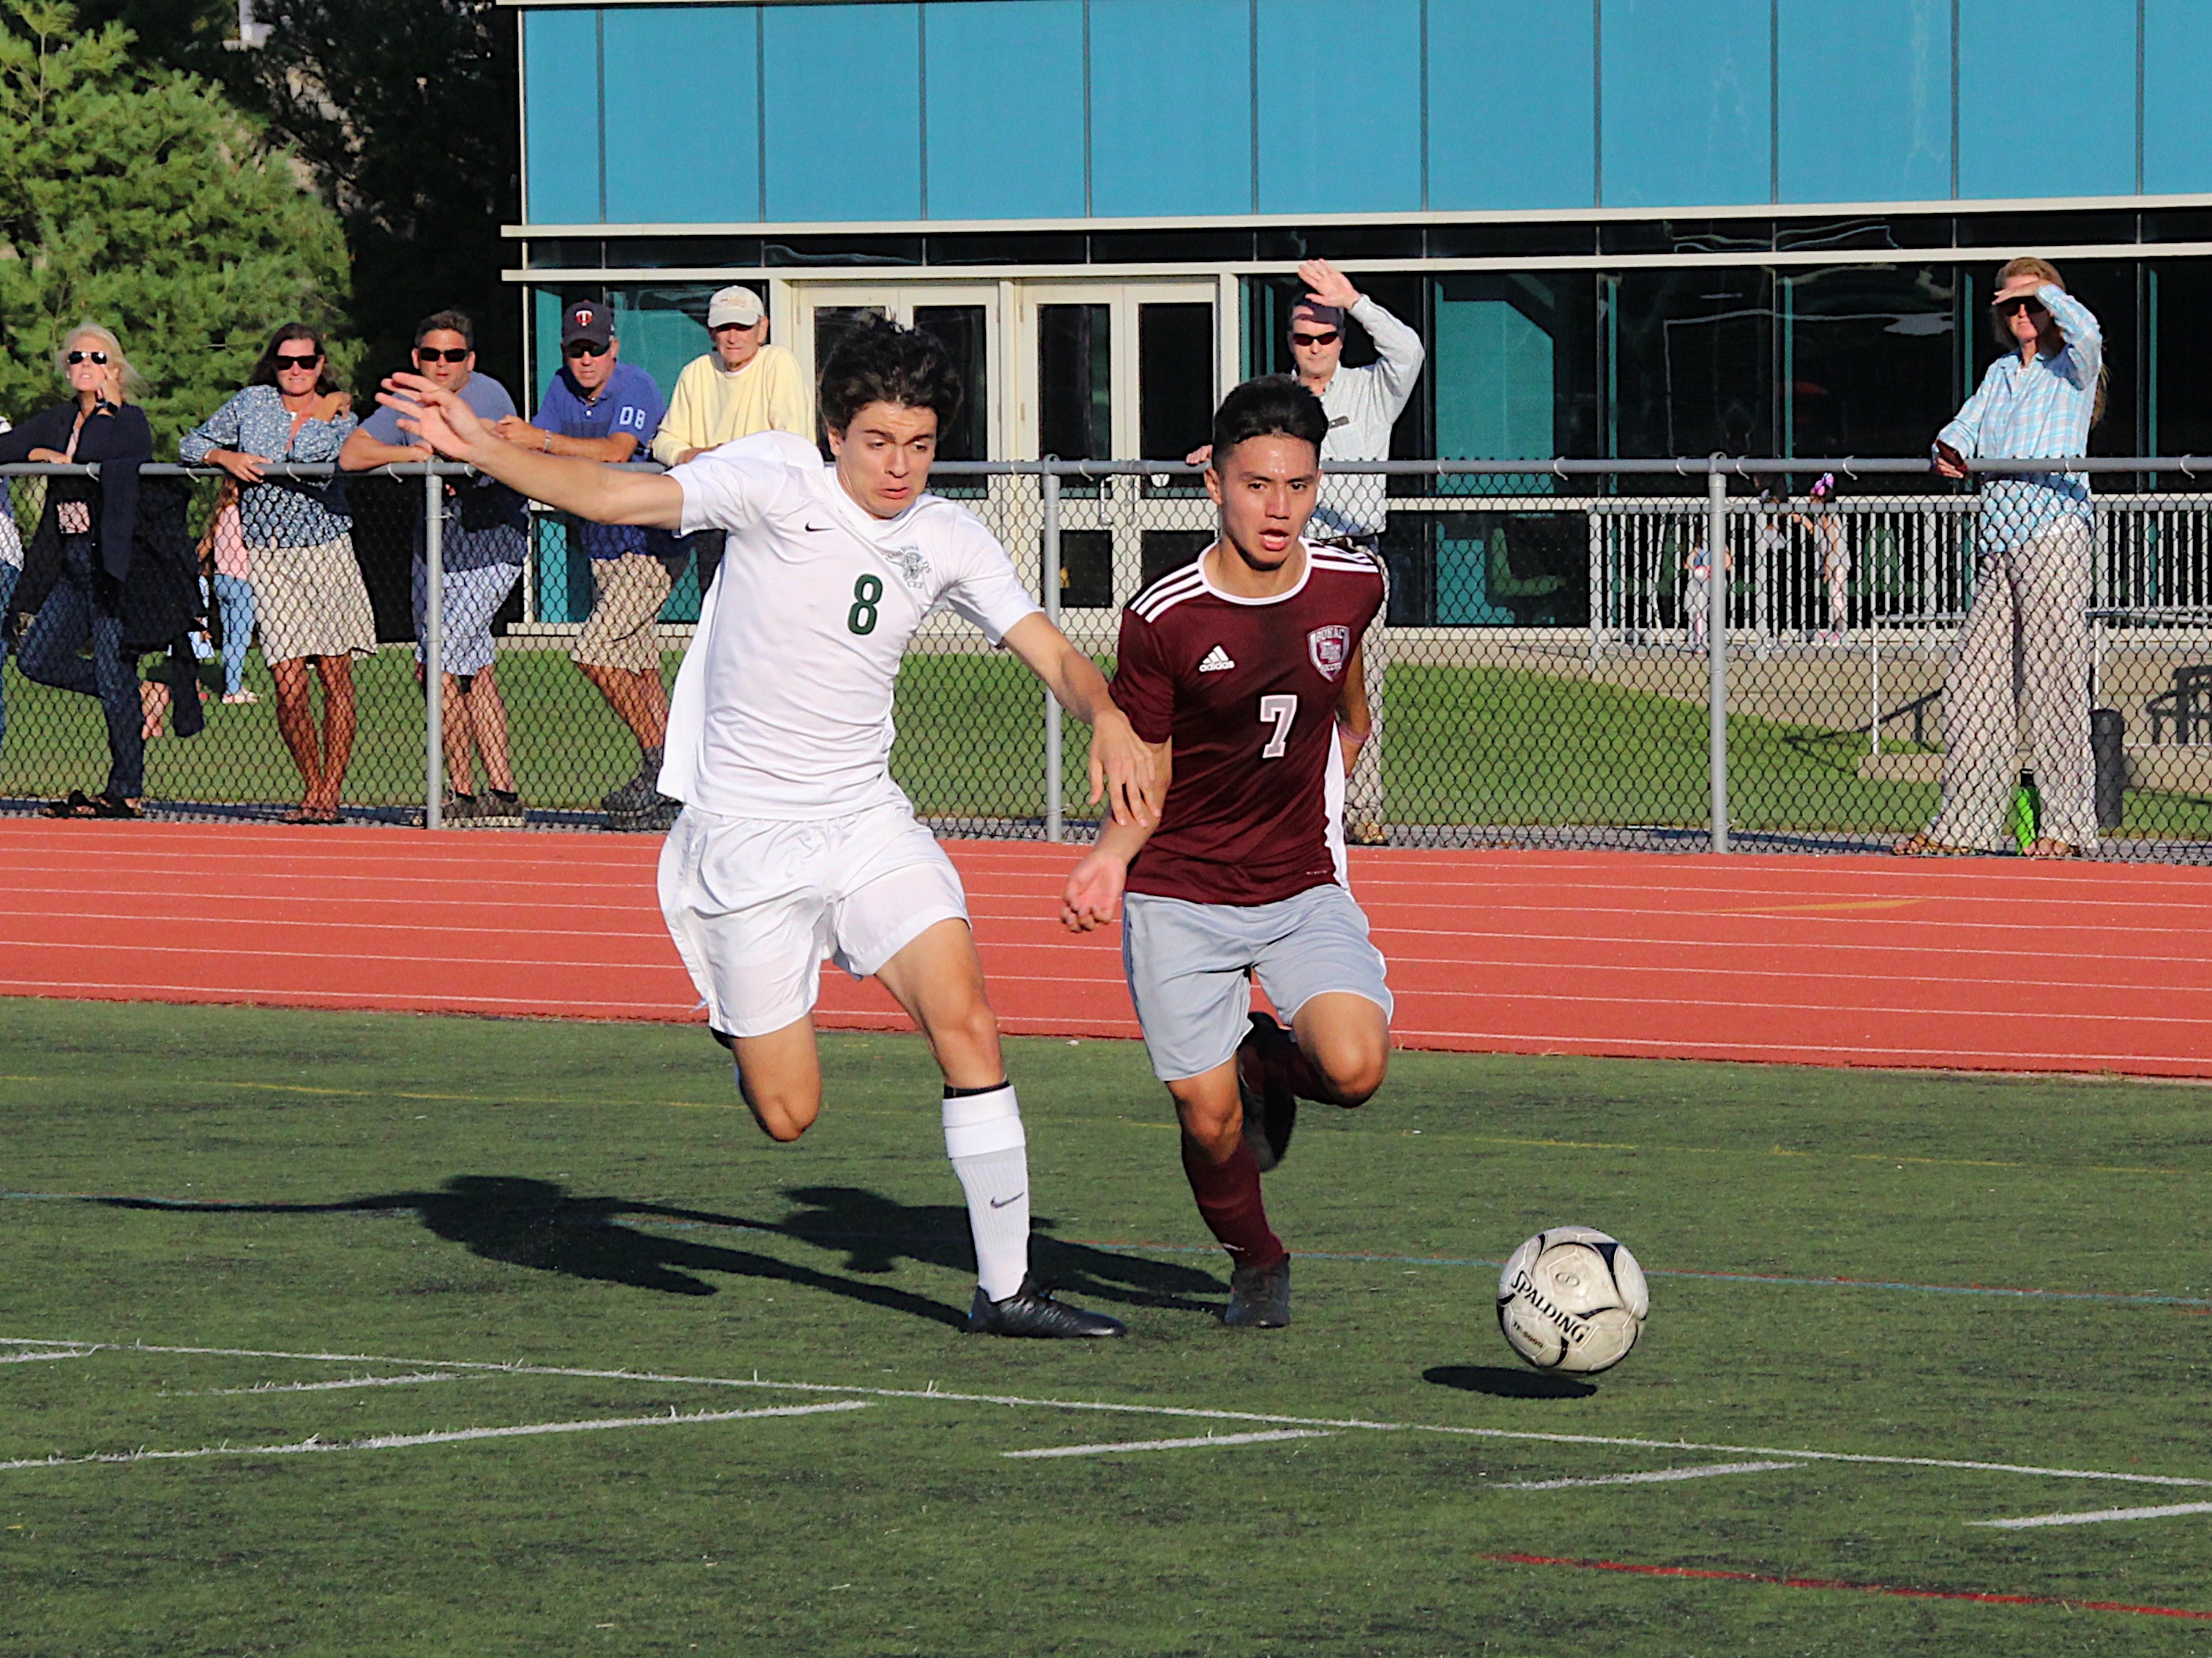 An East Hampton player plays the ball in the corner against Harborfields at home on September 24.